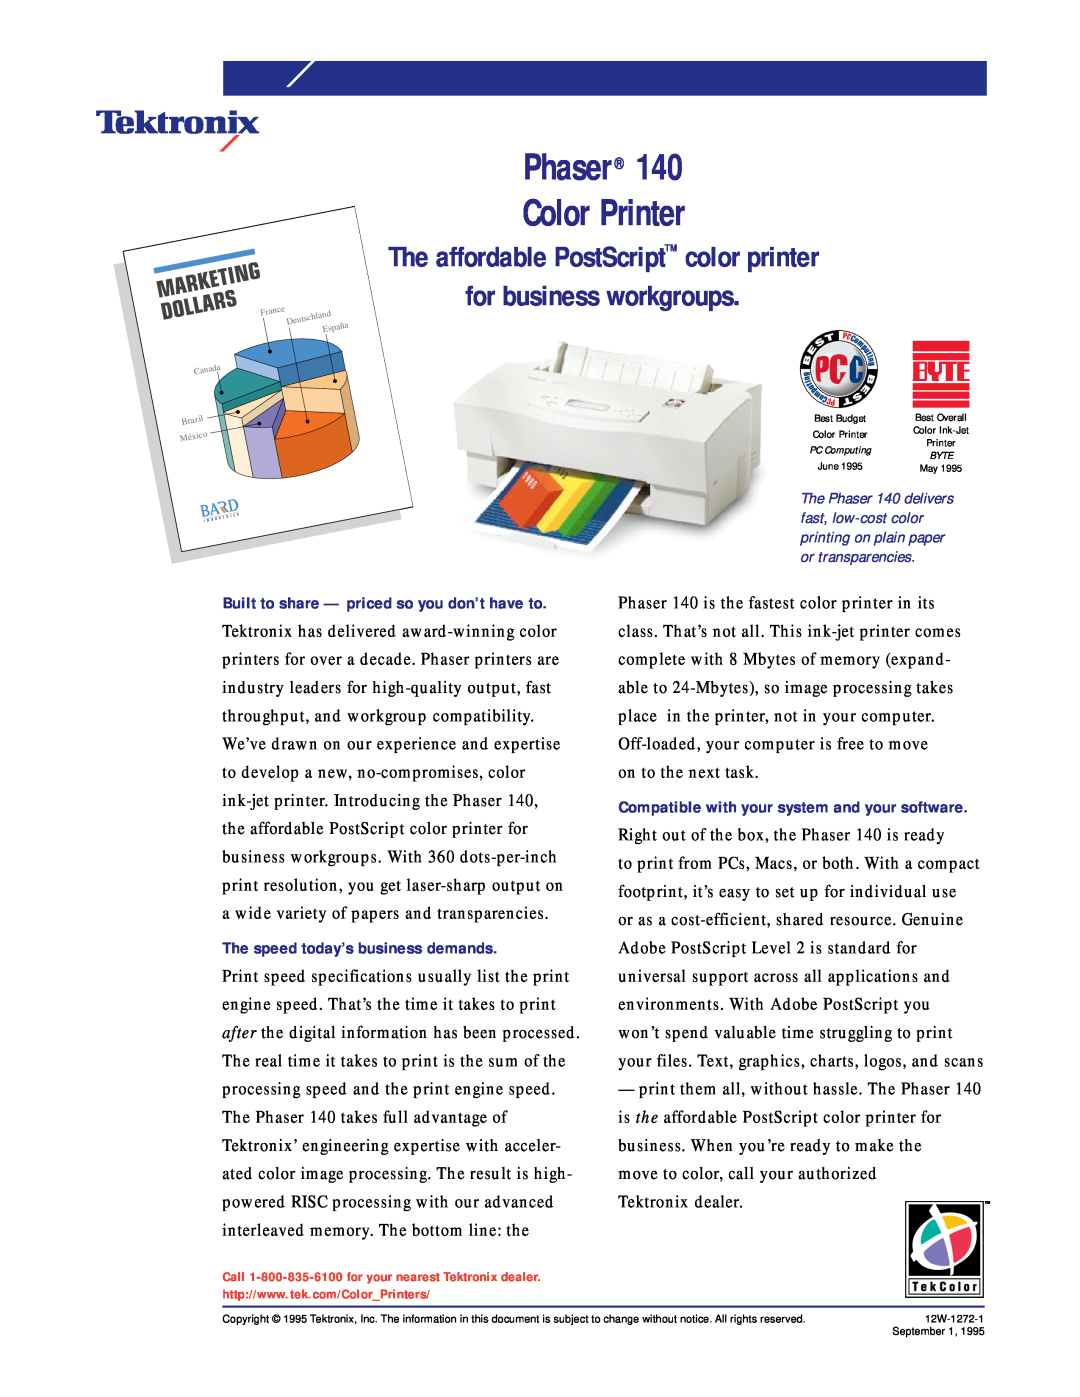 Tektronix 140 specifications Phaser Color Printer, Built to share - priced so you don’t have to 